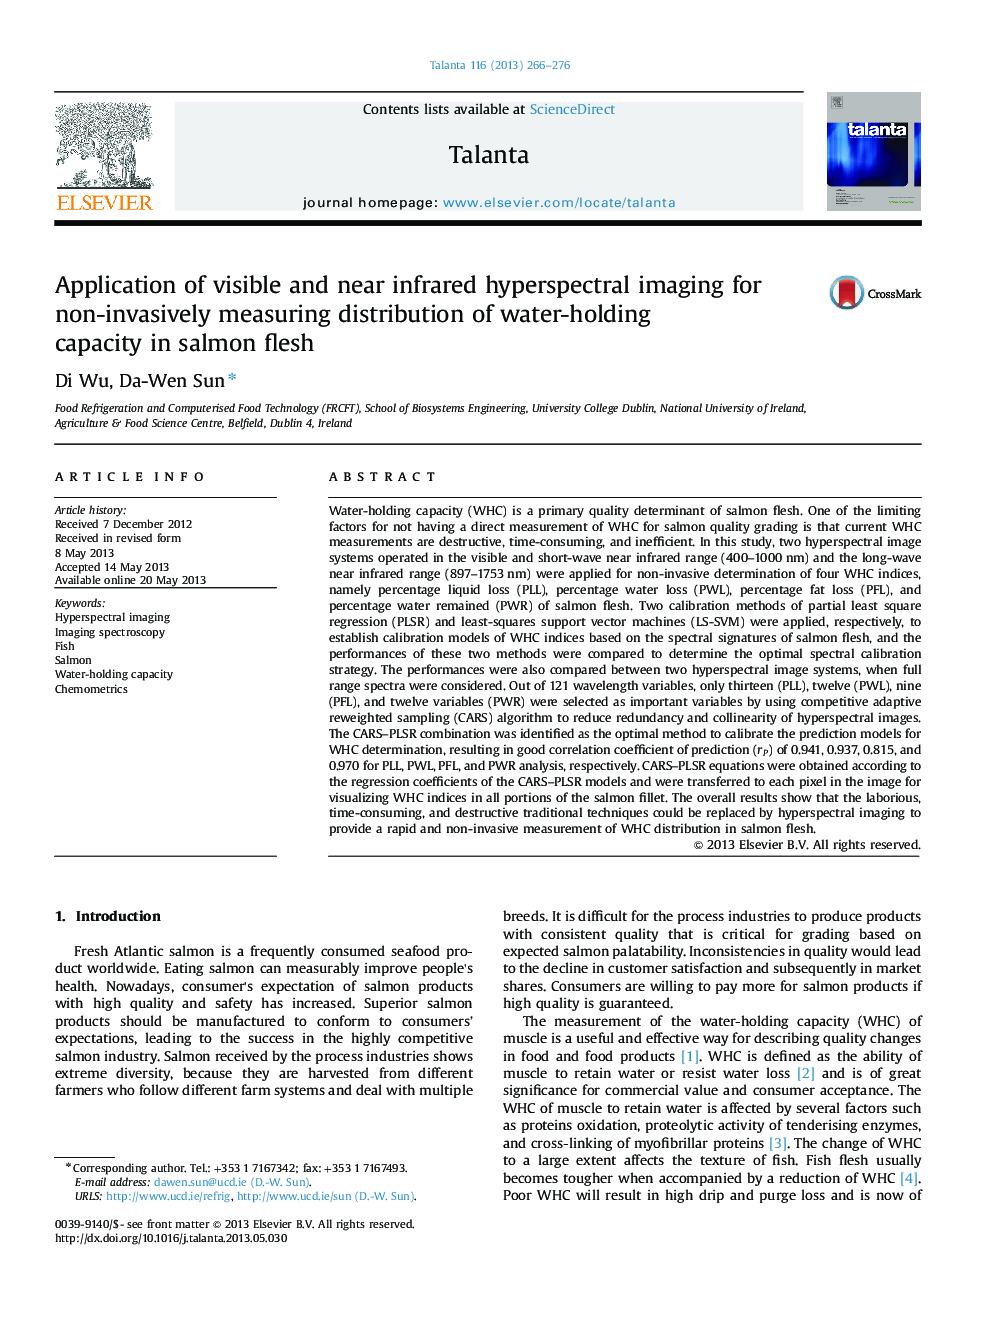 Application of visible and near infrared hyperspectral imaging for non-invasively measuring distribution of water-holding capacity in salmon flesh